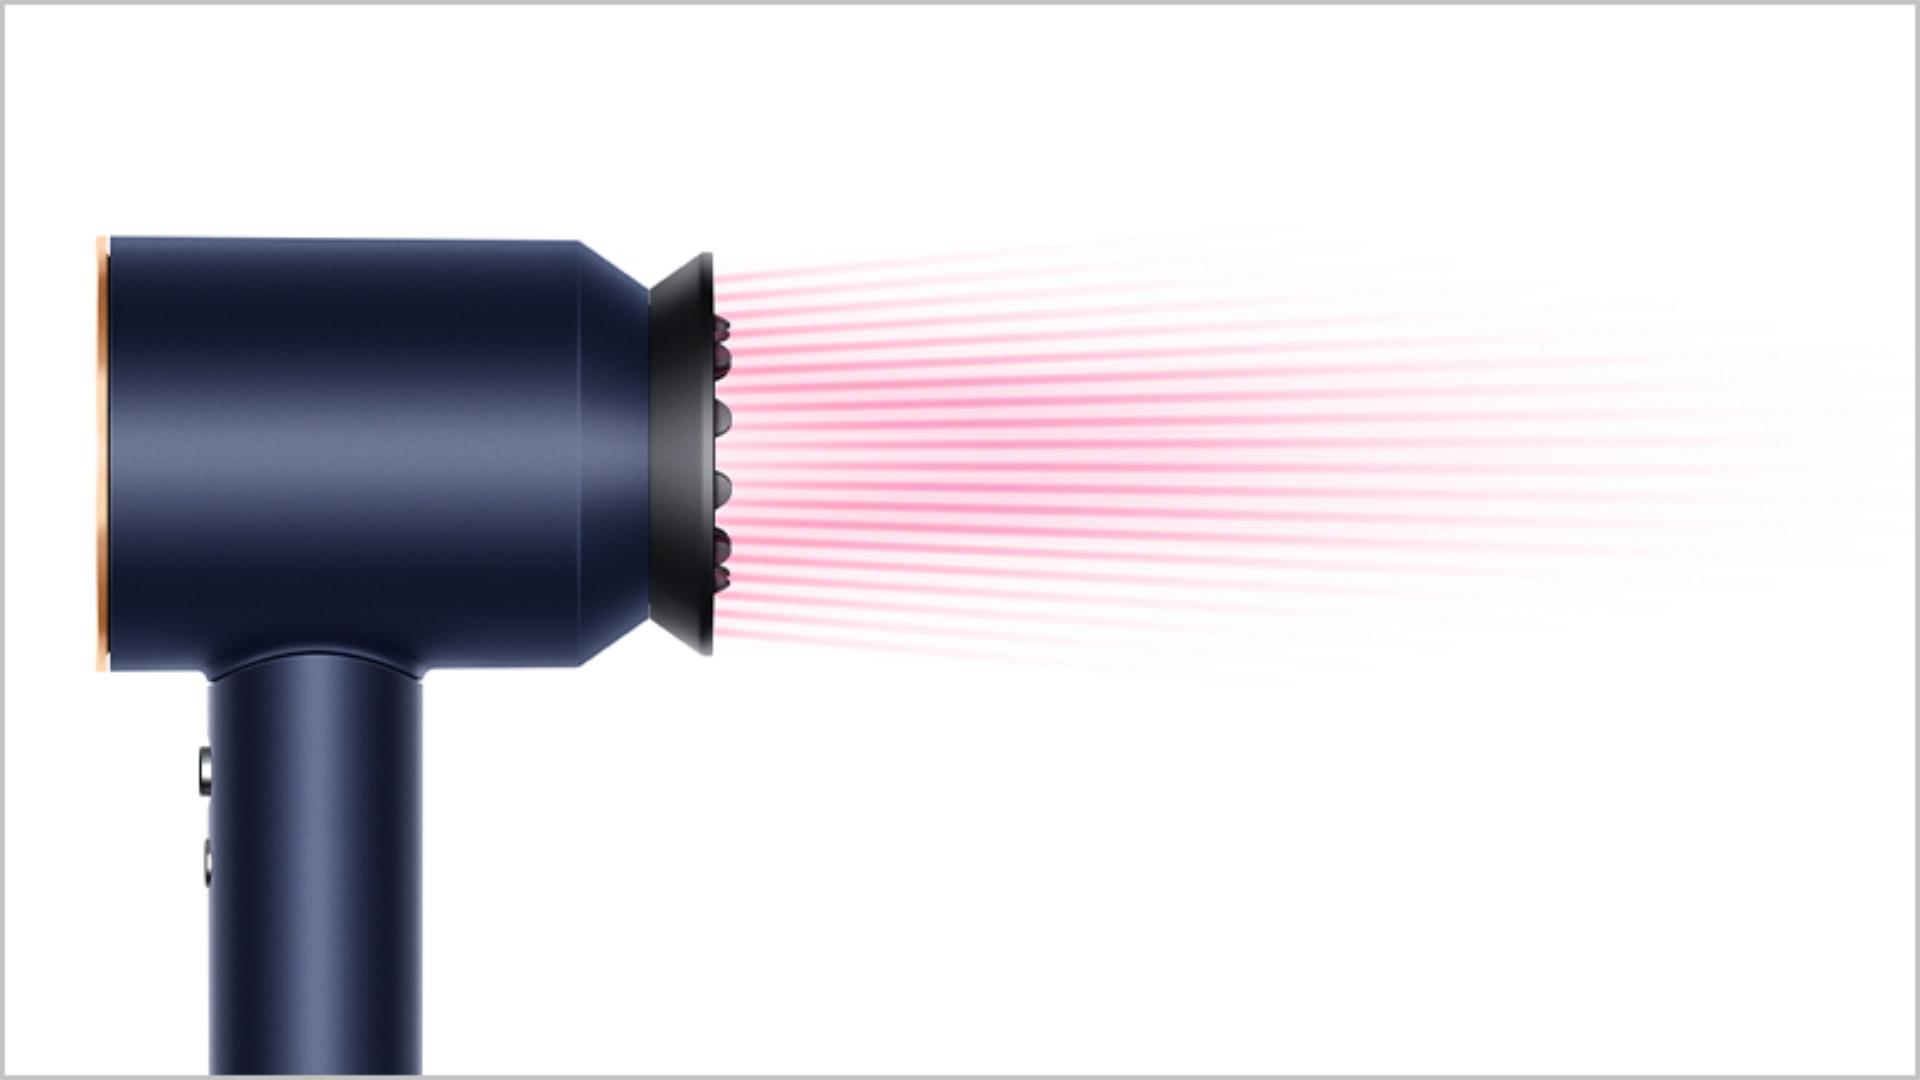 Side view of the Dyson Supersonic with Gentle air attachment.